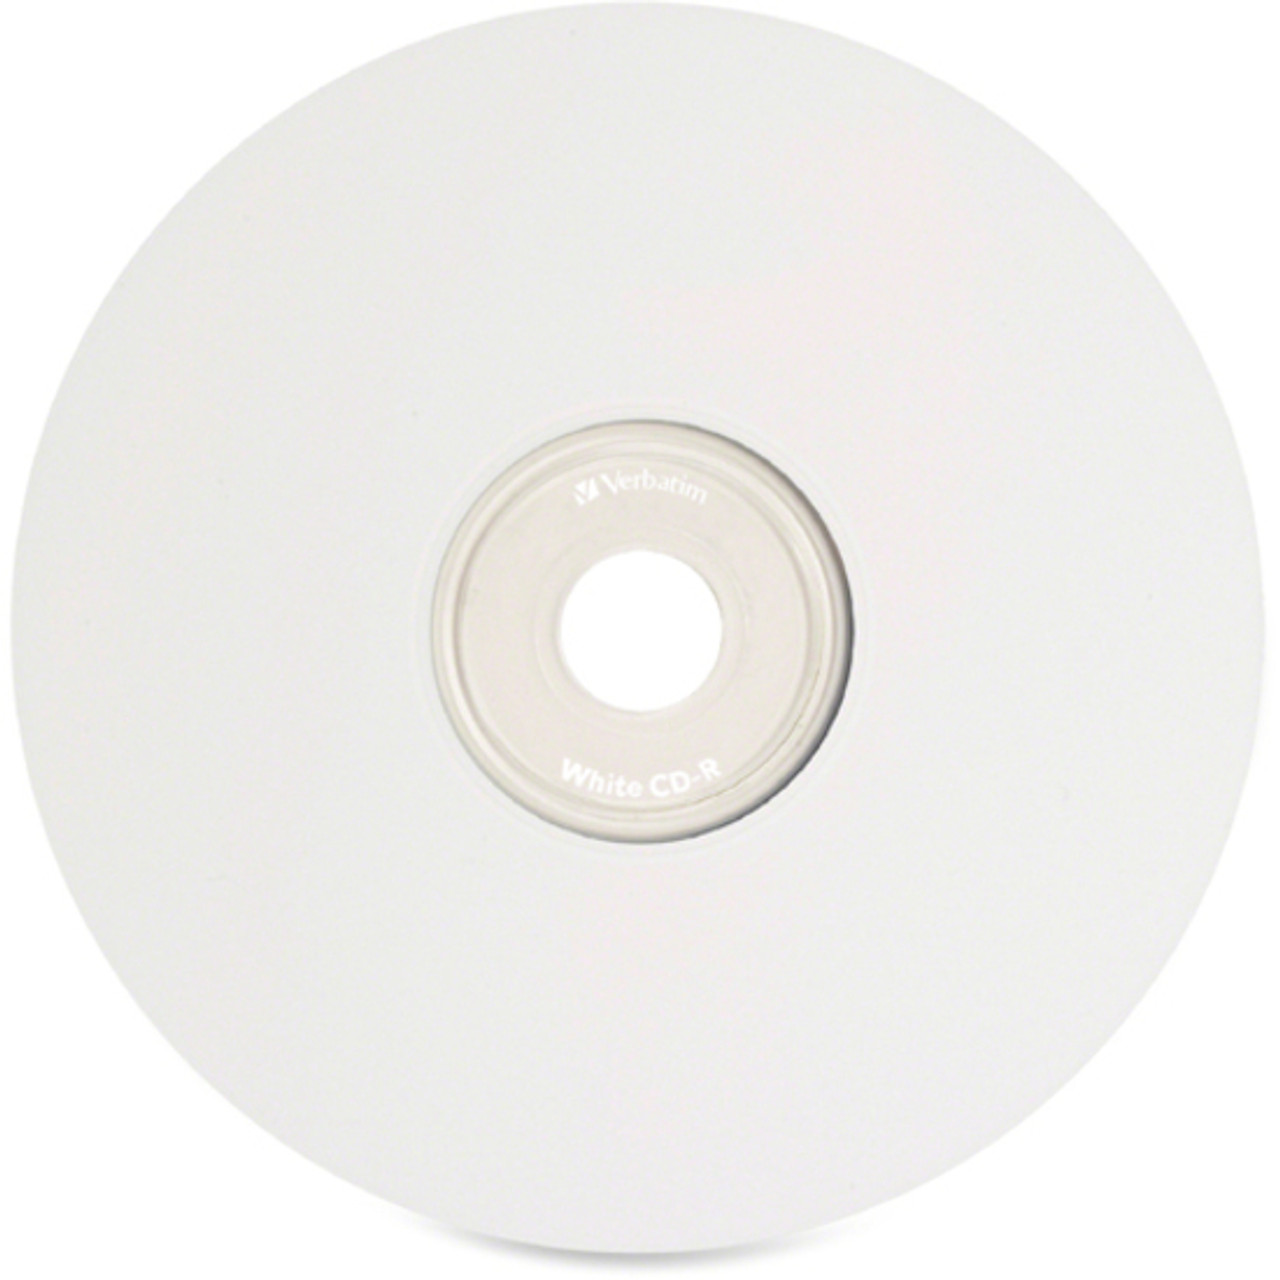 CD R Blank Discs, 52X 700MB Recordable Disc Blank CDs For Burning And  Storing Digital Images Music Data Audio Stable Performance